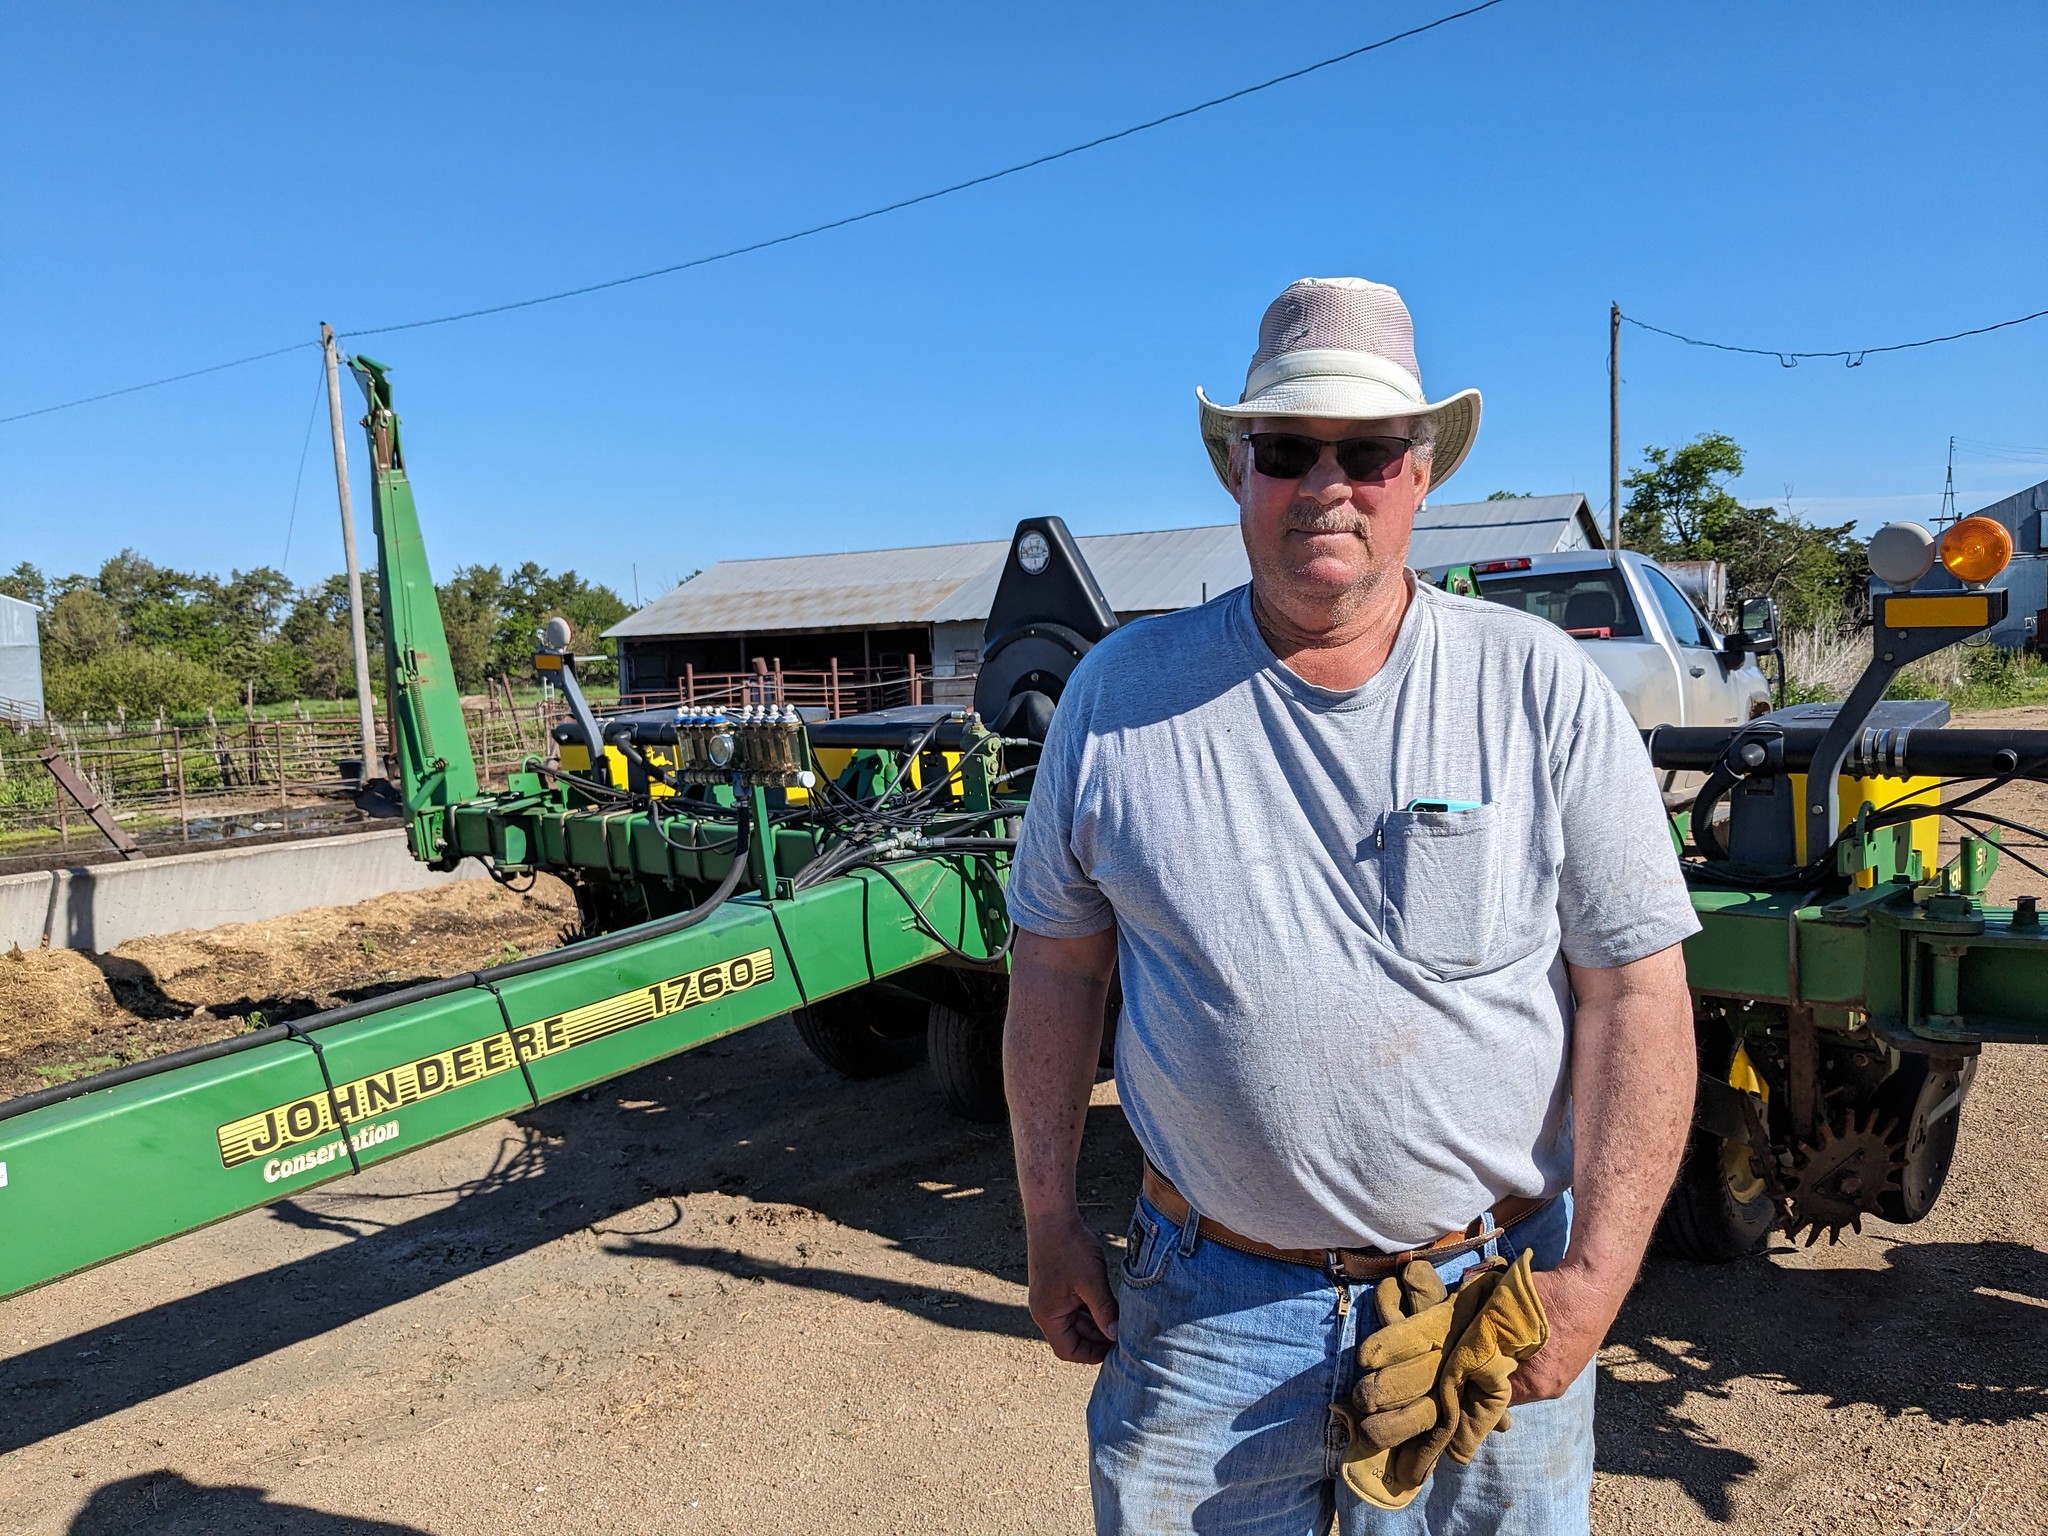 Belleville, Kansas farmer Fred Levendofsky narrowly escaped disaster when his tractor overturned while mowing 30 years ago. (K-State Research and Extension news service)